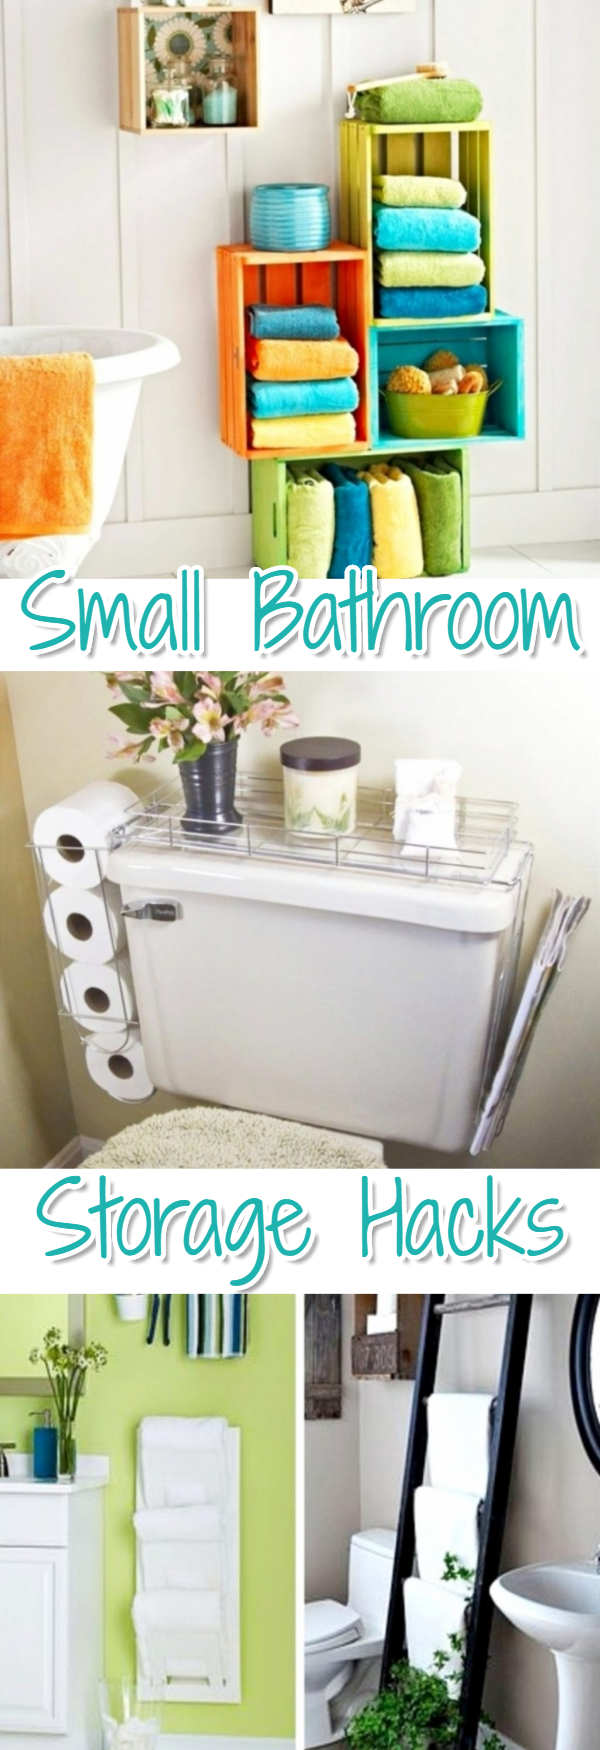 Small bathroom storage solutions - storage ideas for small bedrooms - great DIY ideas and hacks for all small spaces